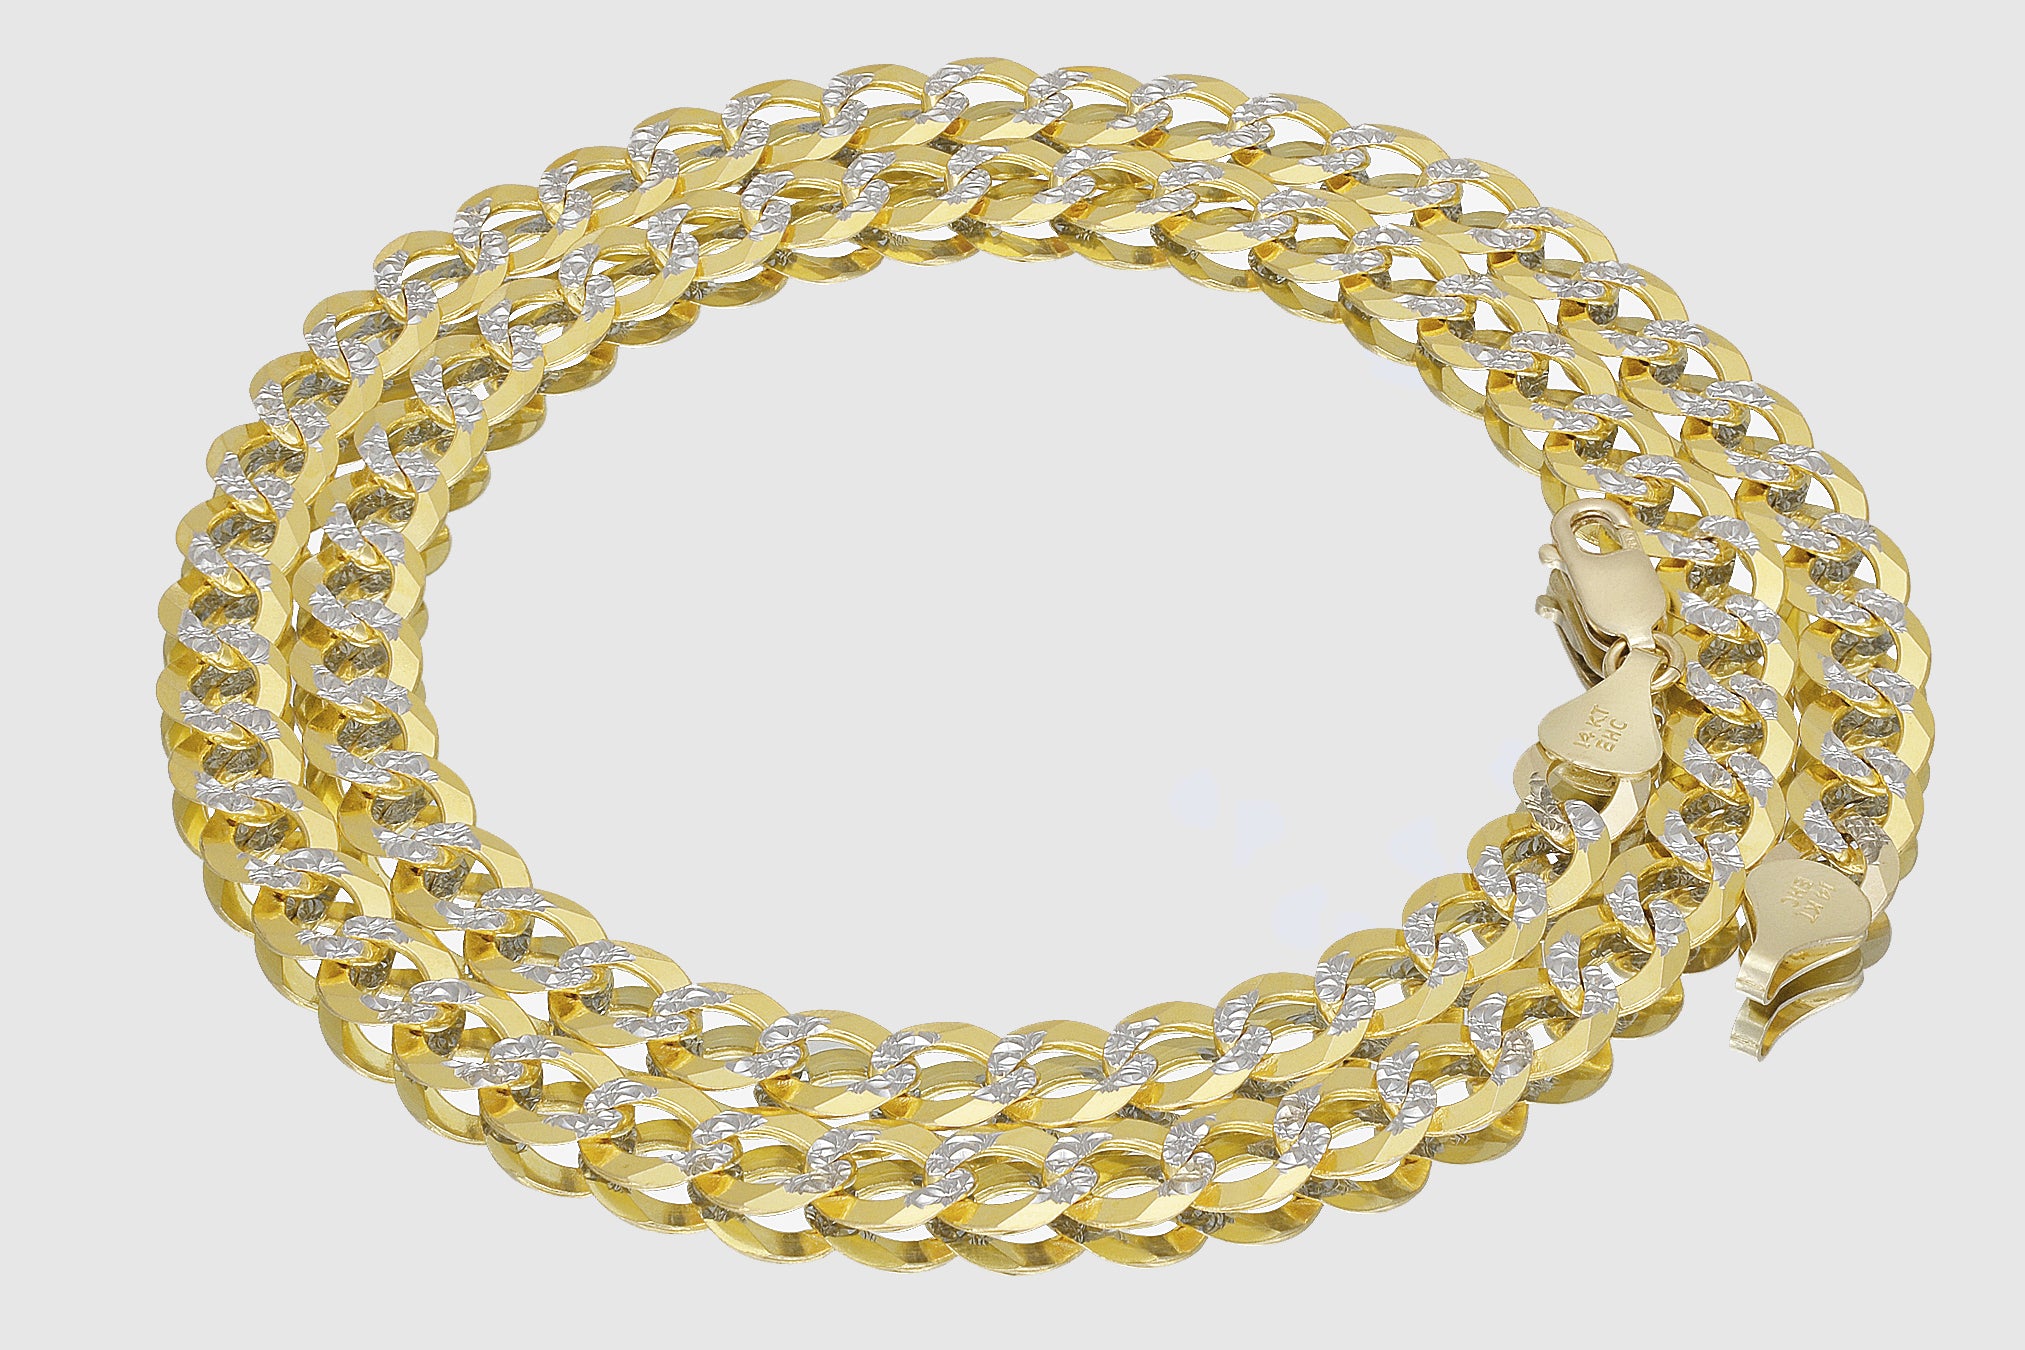 22 Inch Pave Diamond Solid Gold Cuban Link Chain Necklace - 11 mm